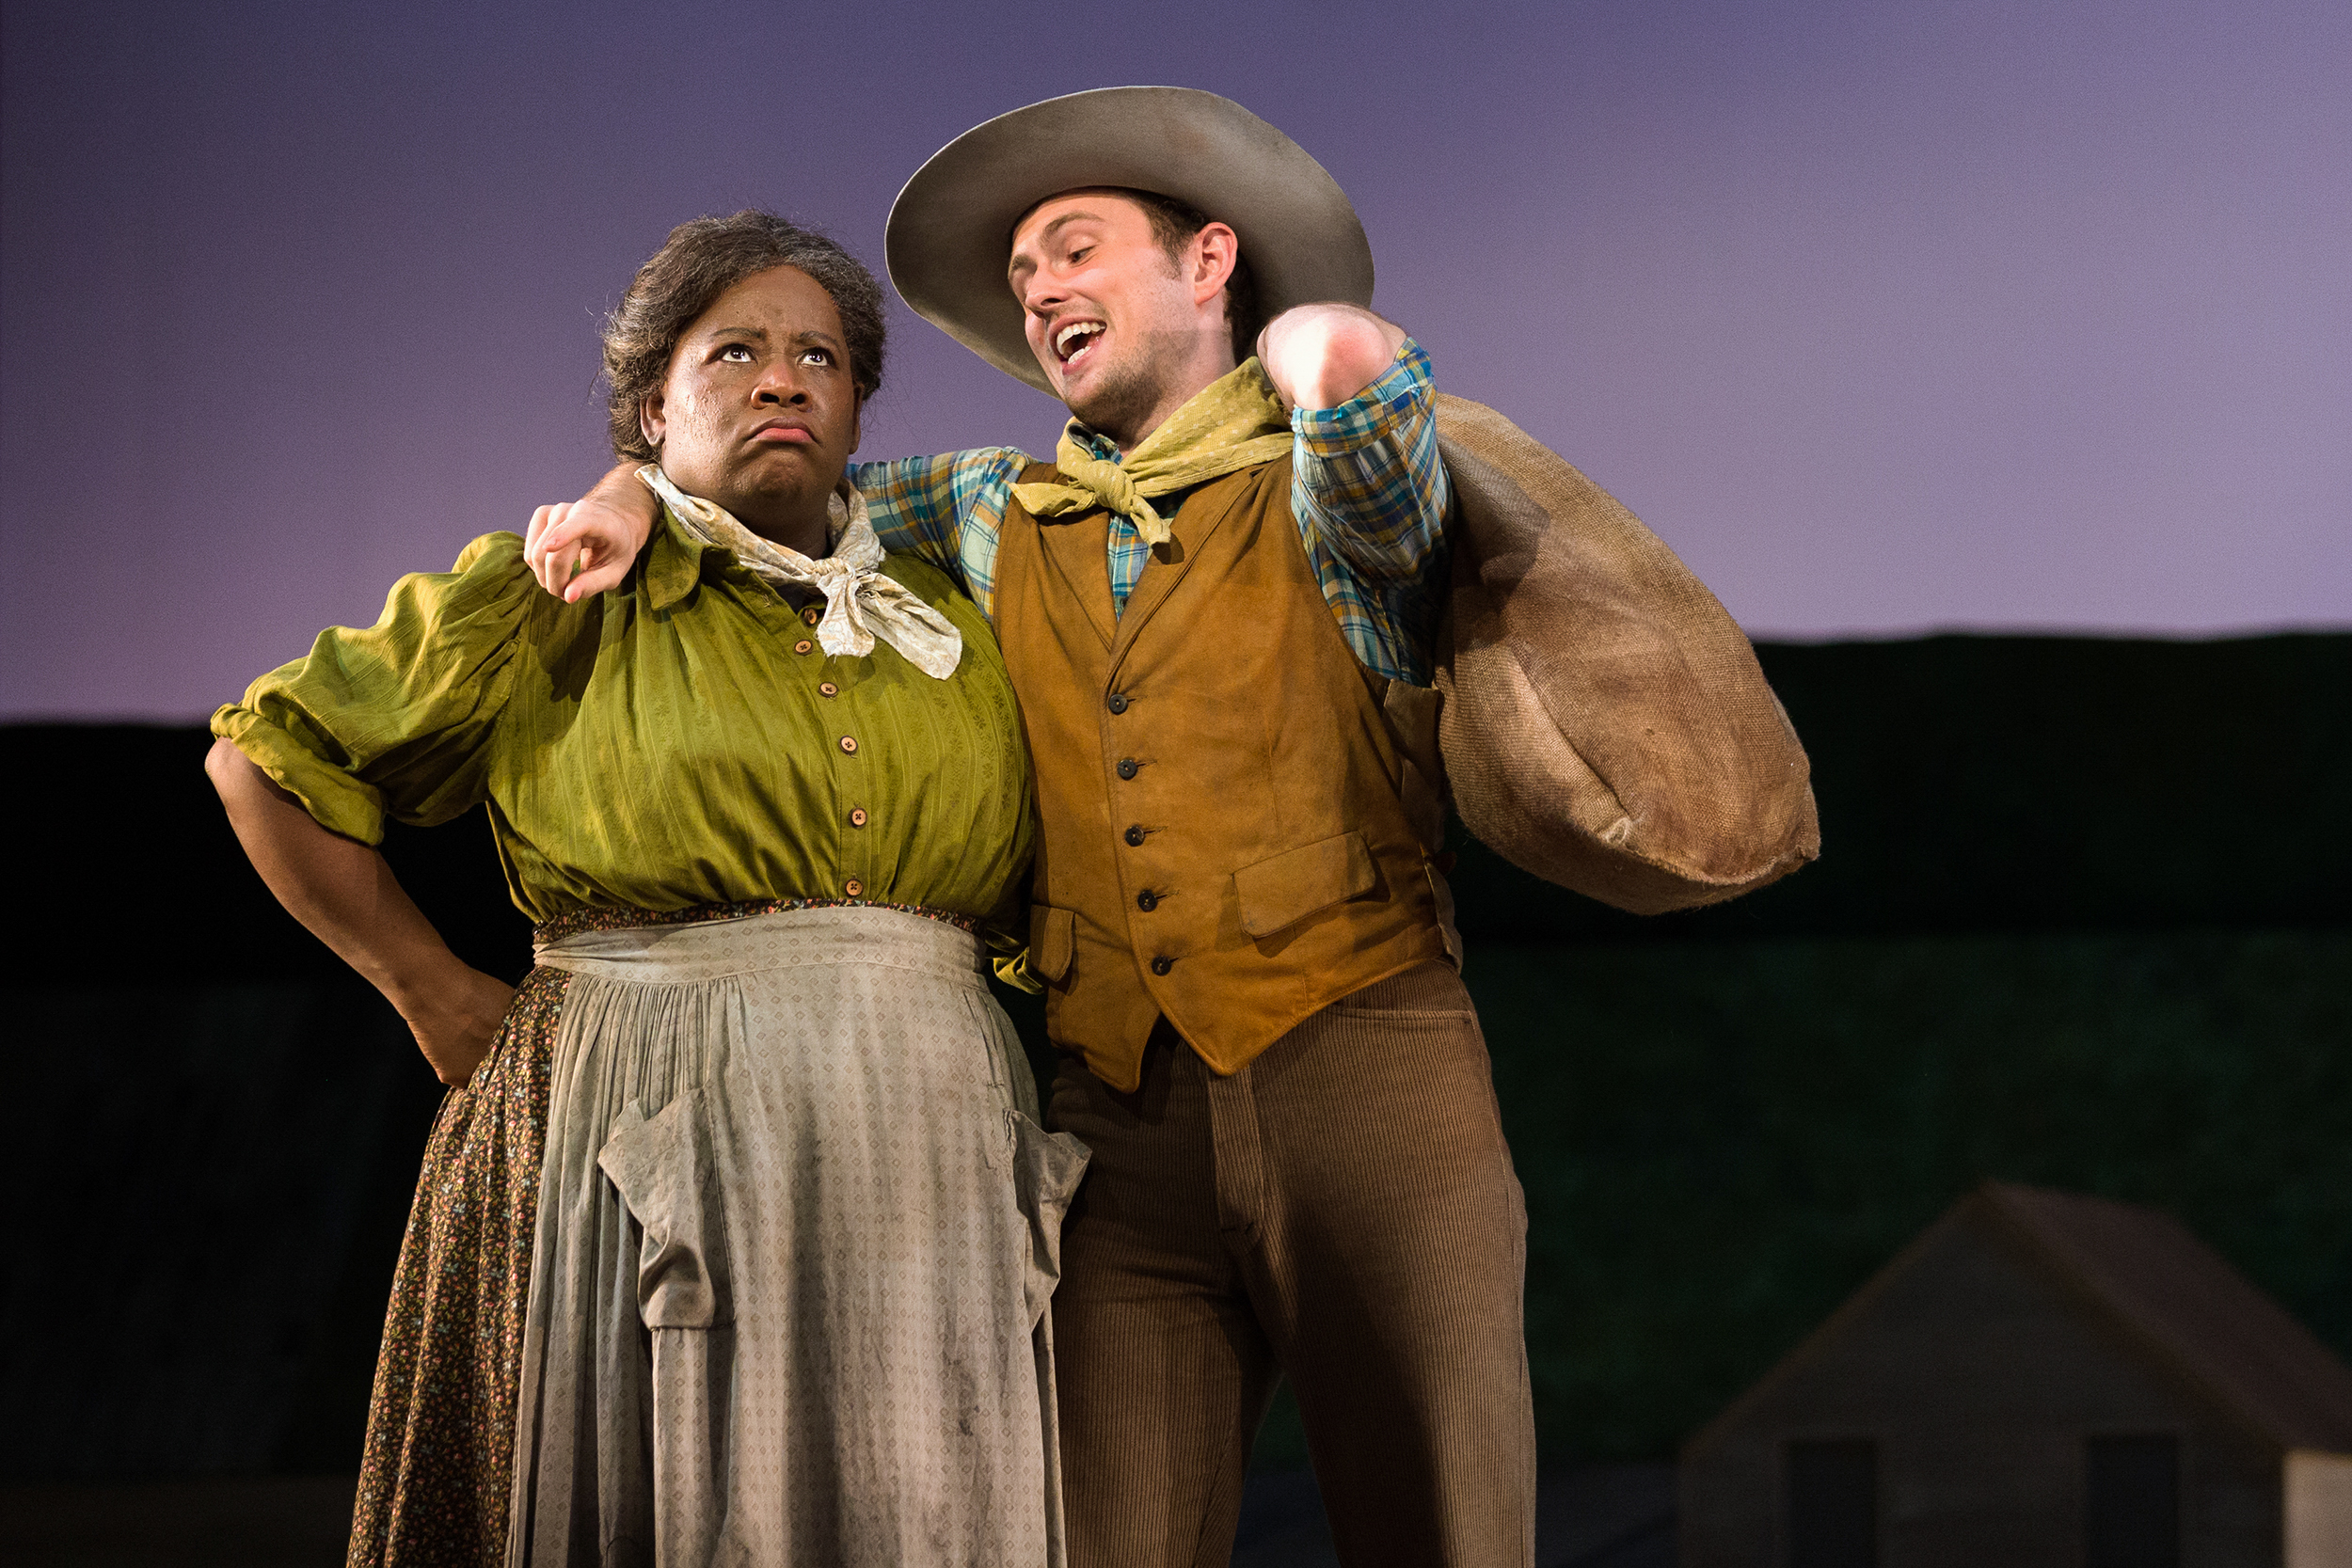  Judith Skinner as Aunt Eller and Michael Roach as Will Parker in The Glimmerglass Festival's 2017 production of Rodgers and Hammerstein's  Oklahoma!  